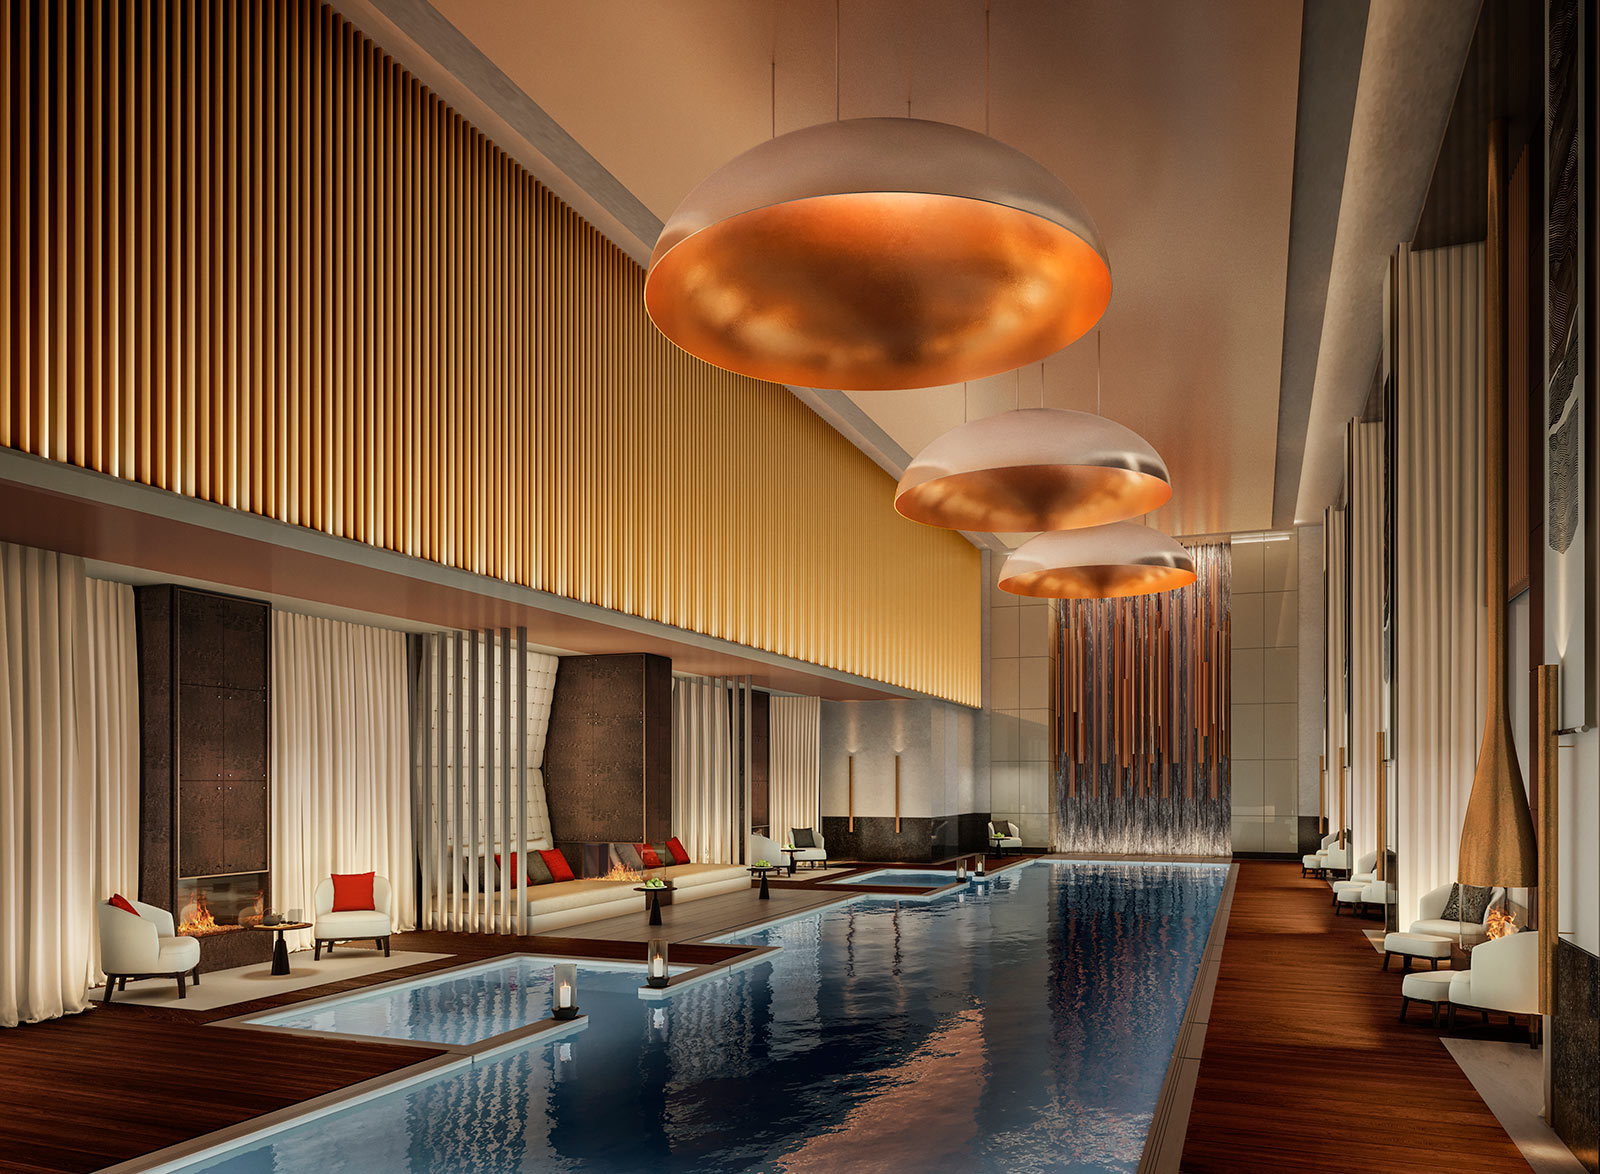 Indoor pool at Aman New York, one of the best new hotels to book in 2021